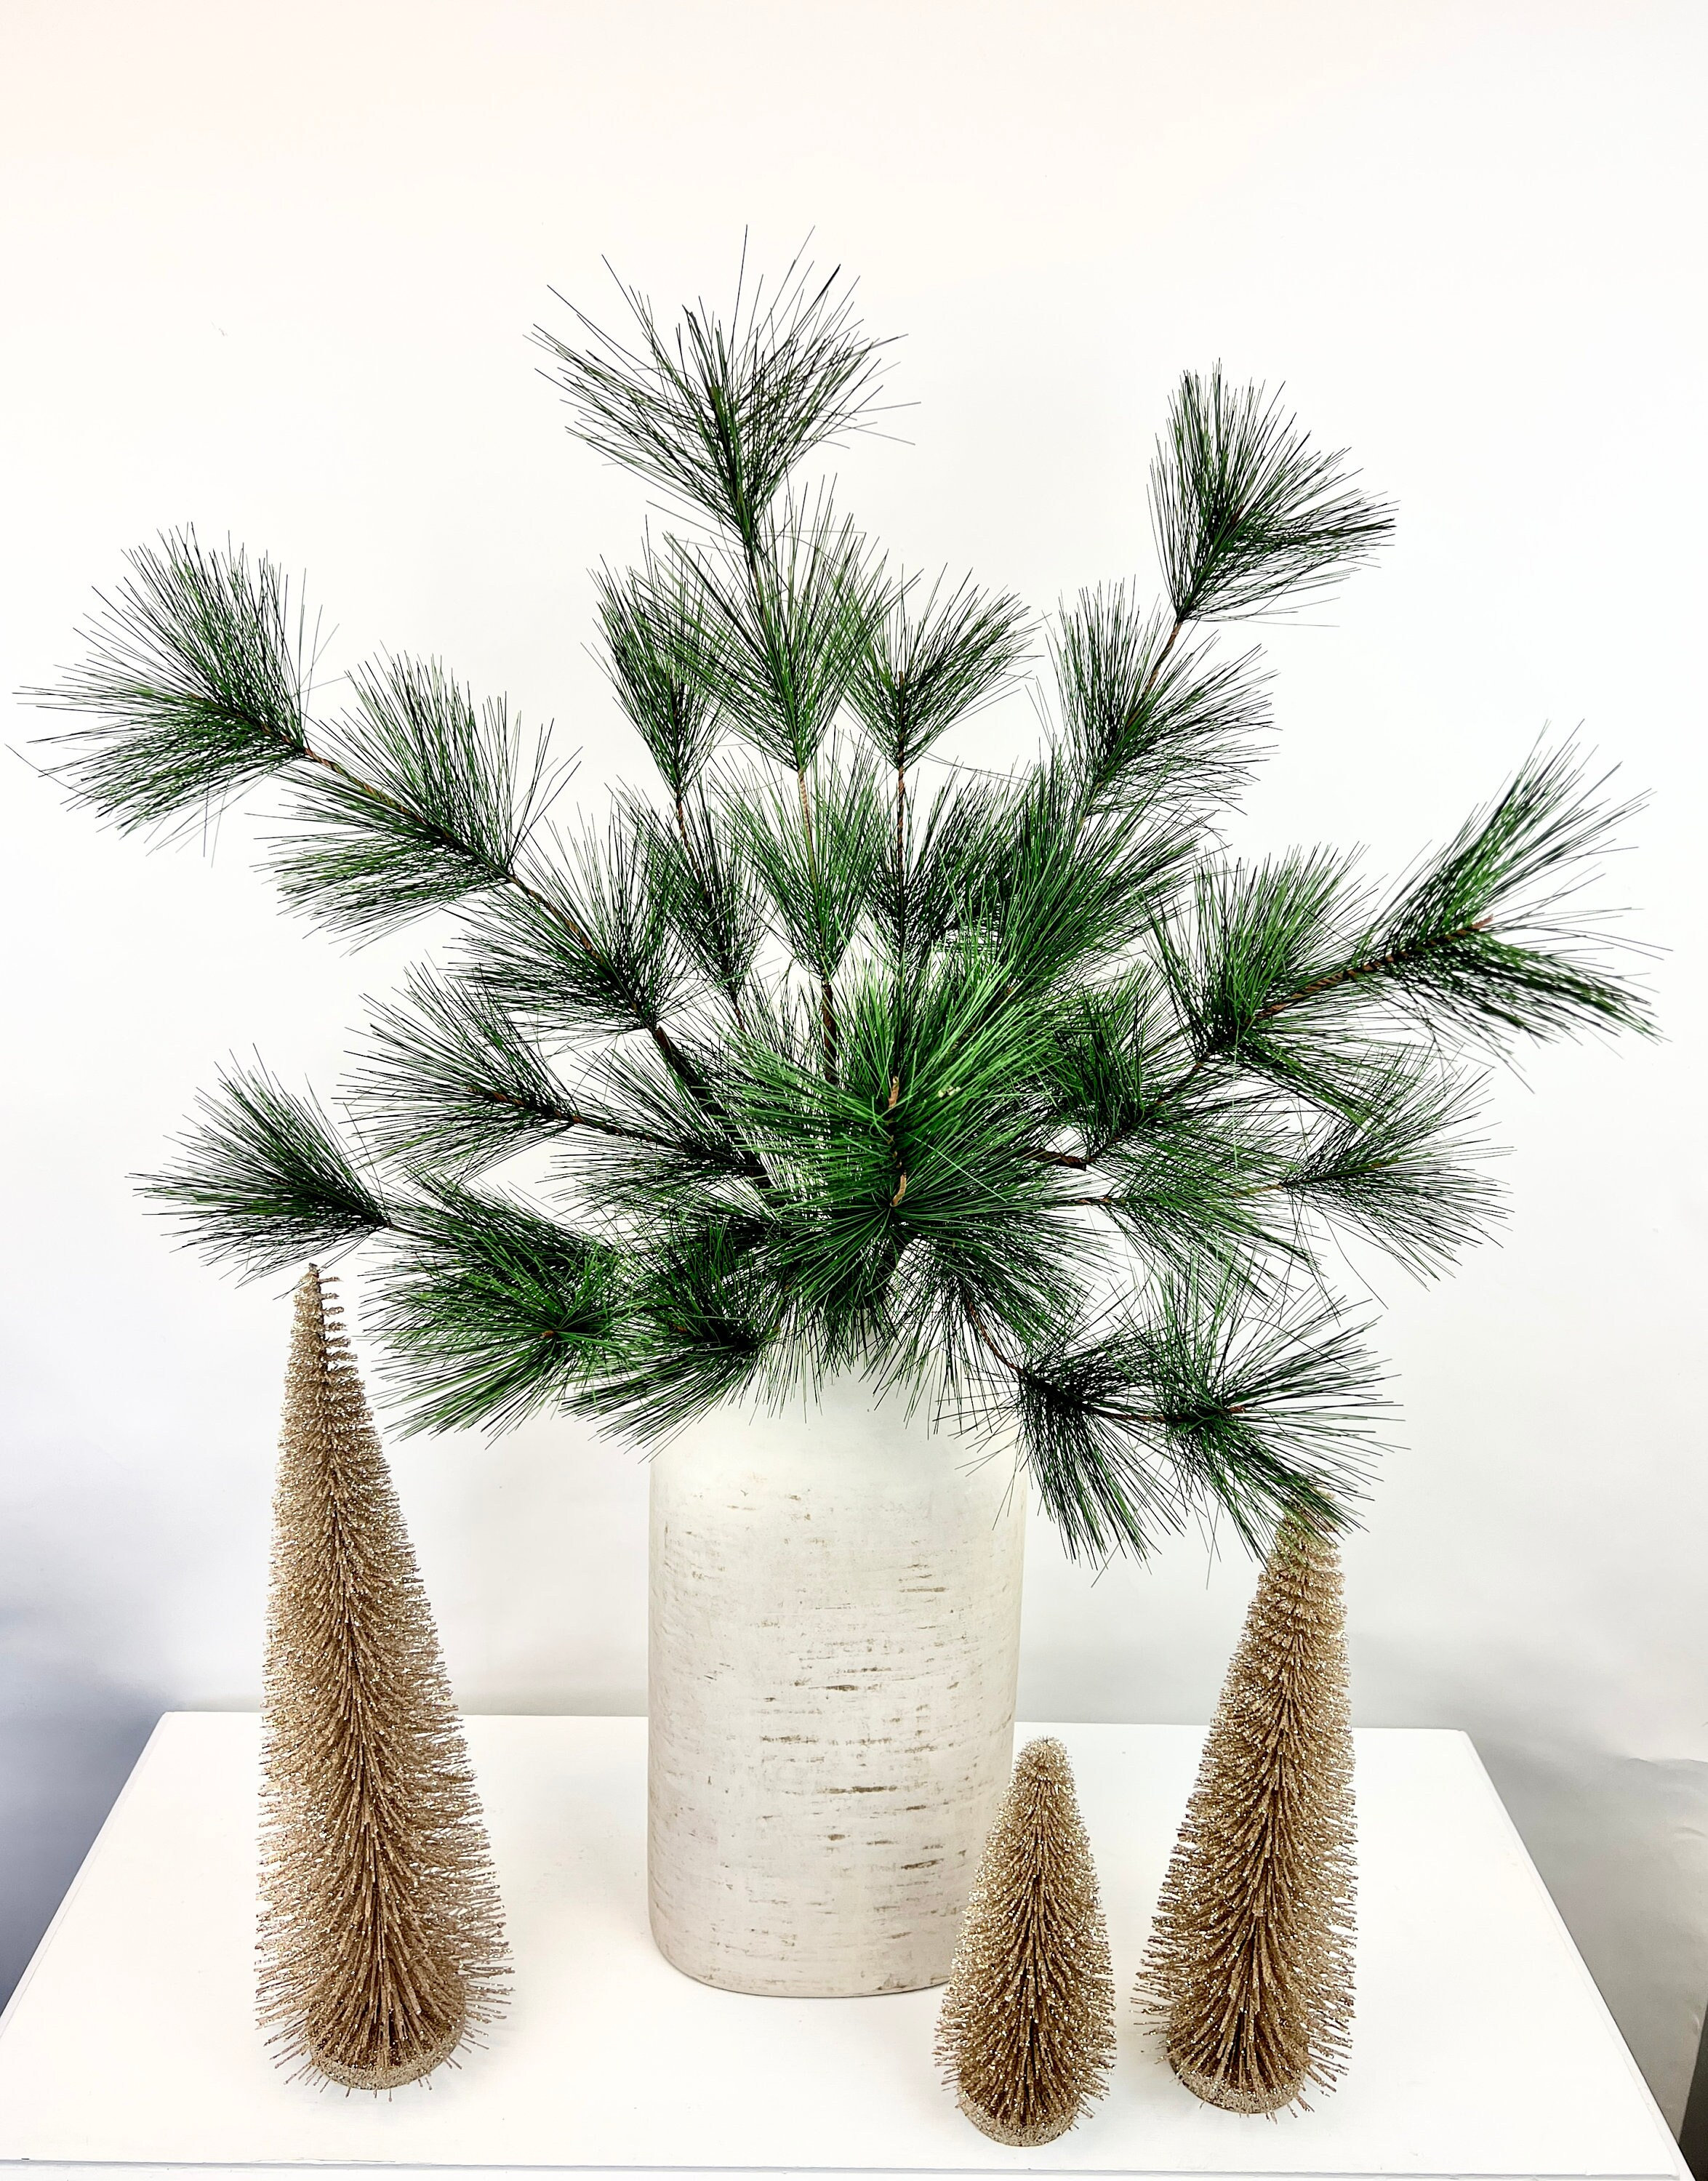 2/30Pcs Artificial Pine Needles Branches Christmas Tree Green